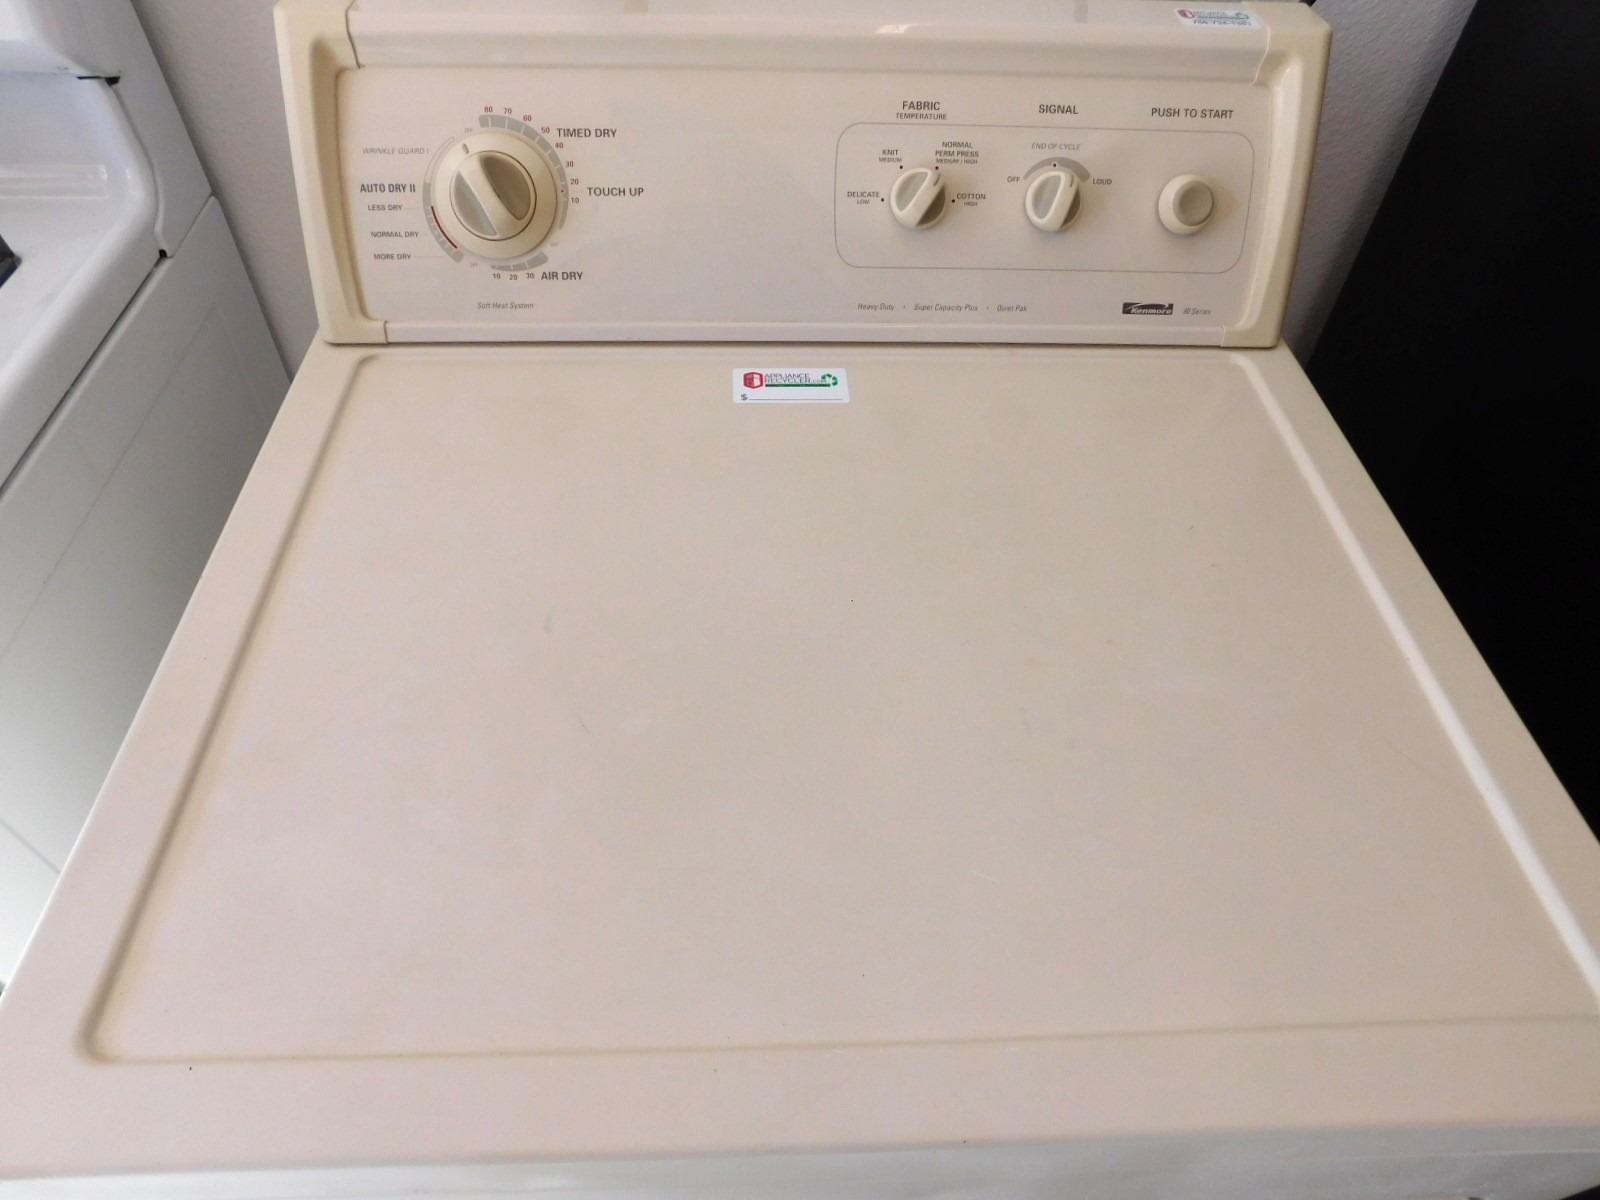 Kenmore 70 Series Heavy Duty Washer and Dryer (( Local Pick up only))